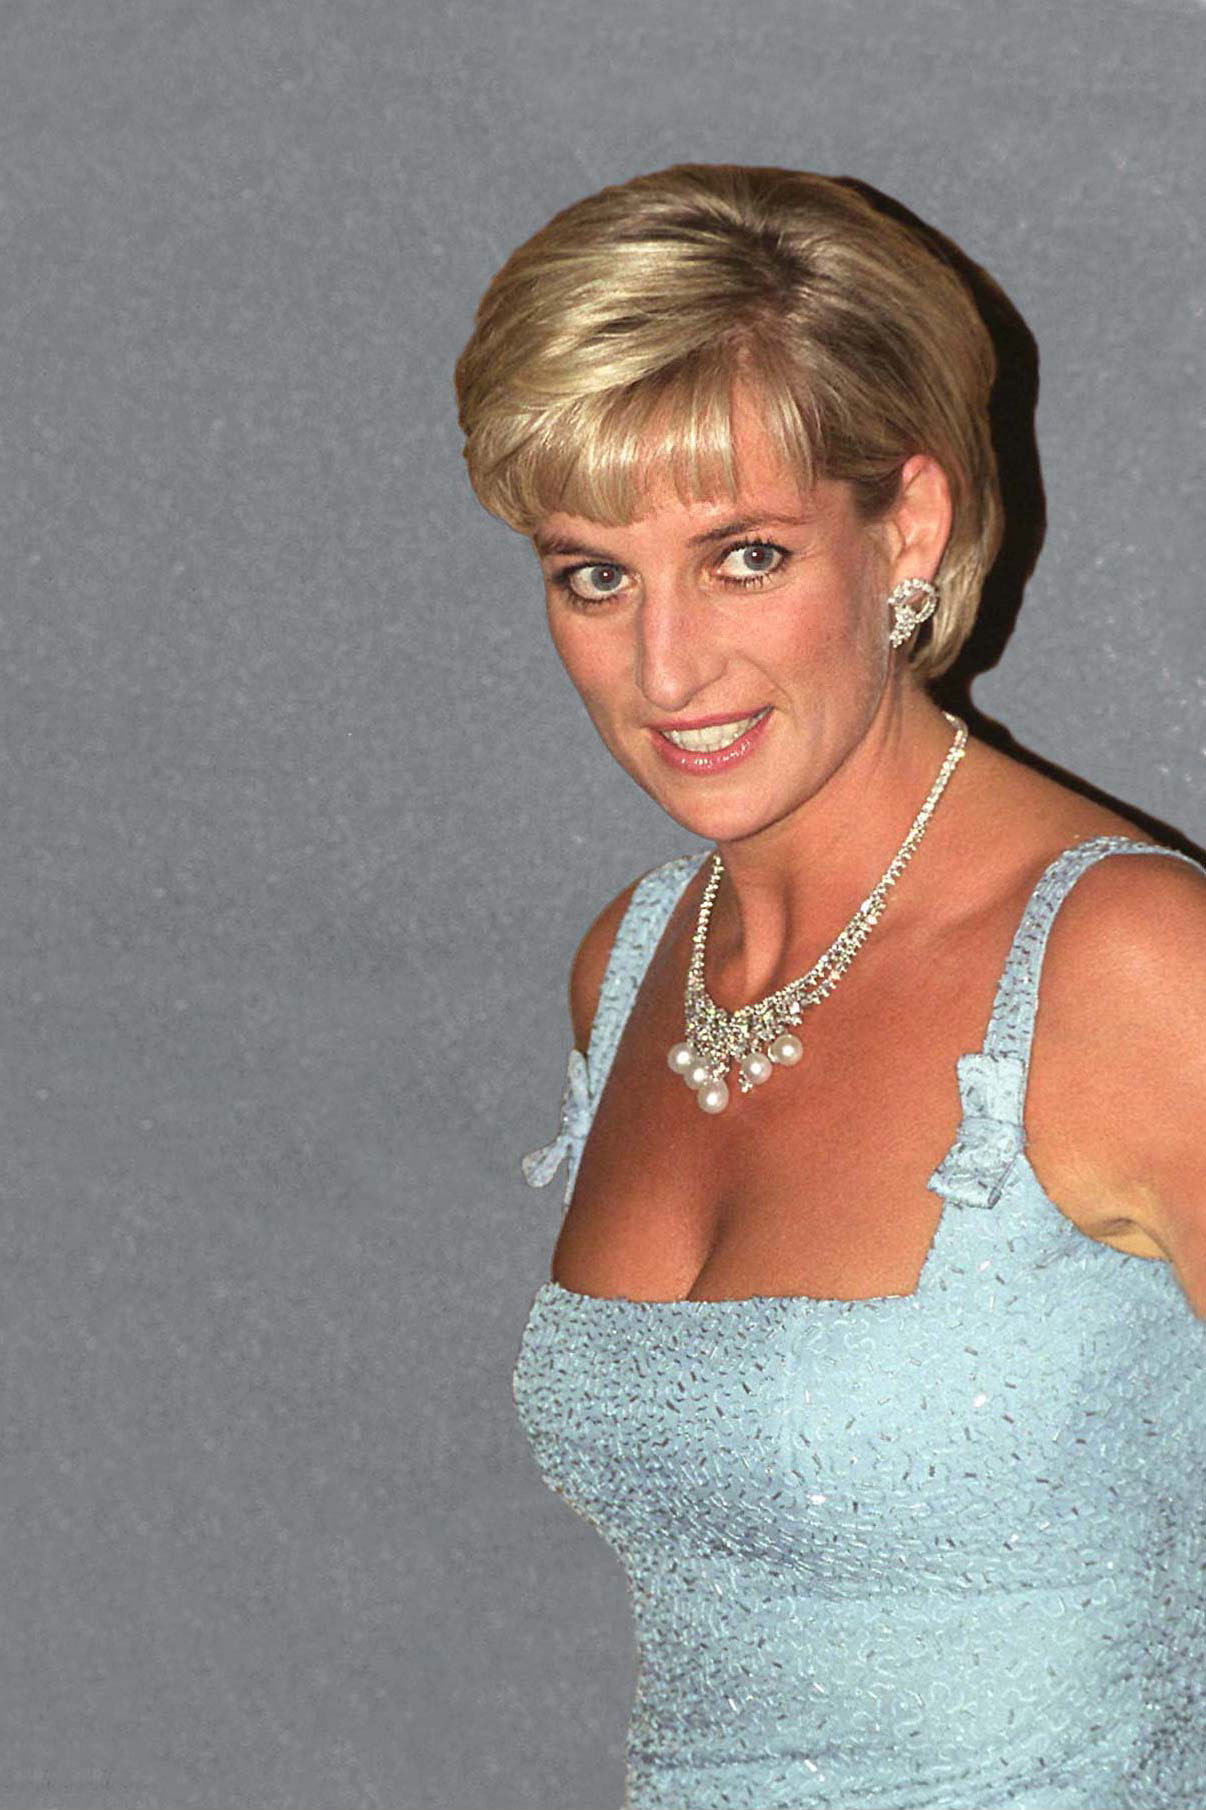 Diana, Princess of Wales on June 3, 1997 | Source: Getty Images